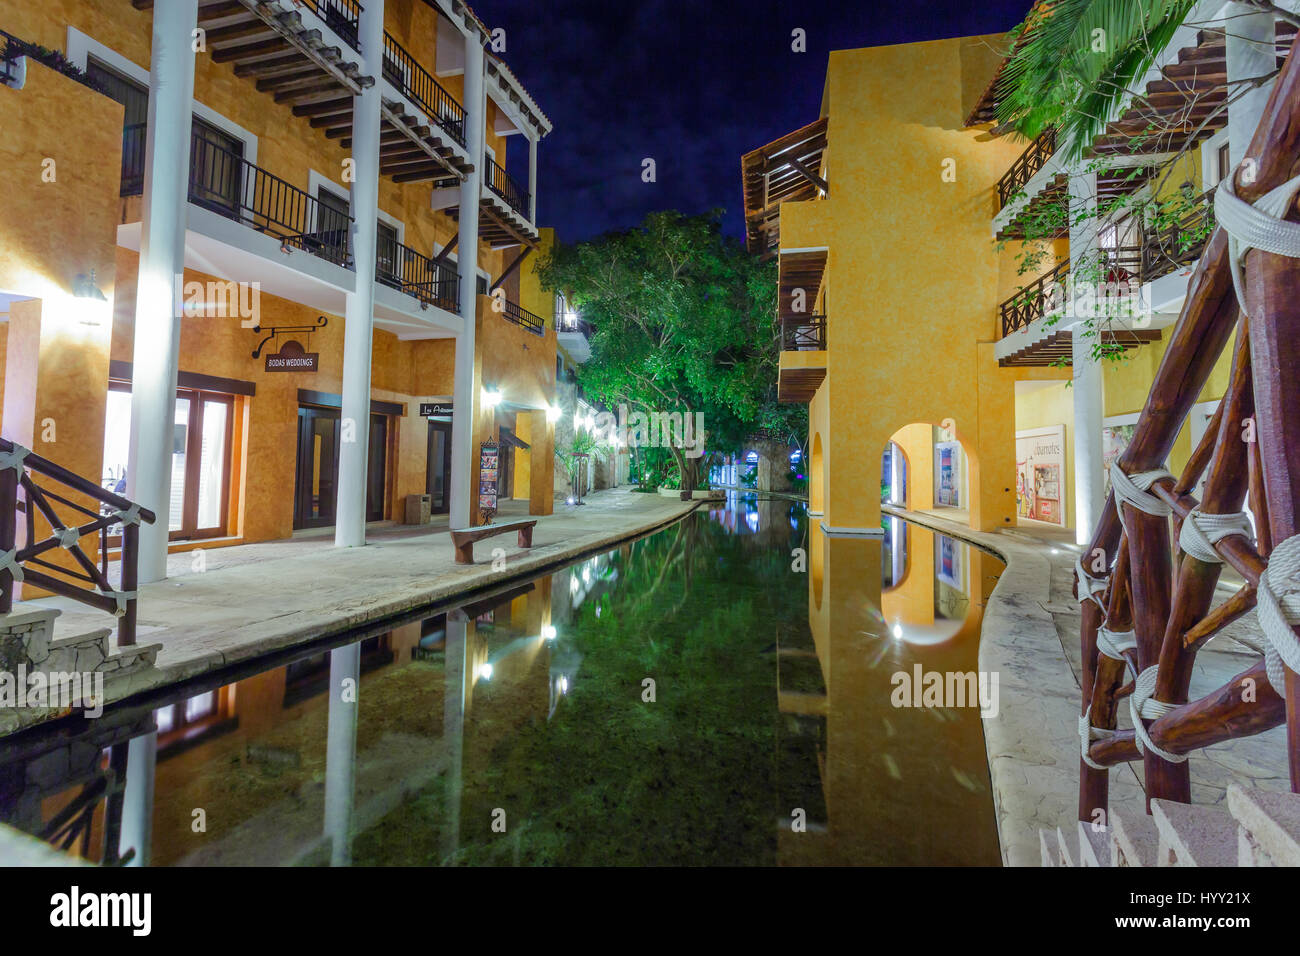 View on hotel at night, Cancun, Mexico Stock Photo